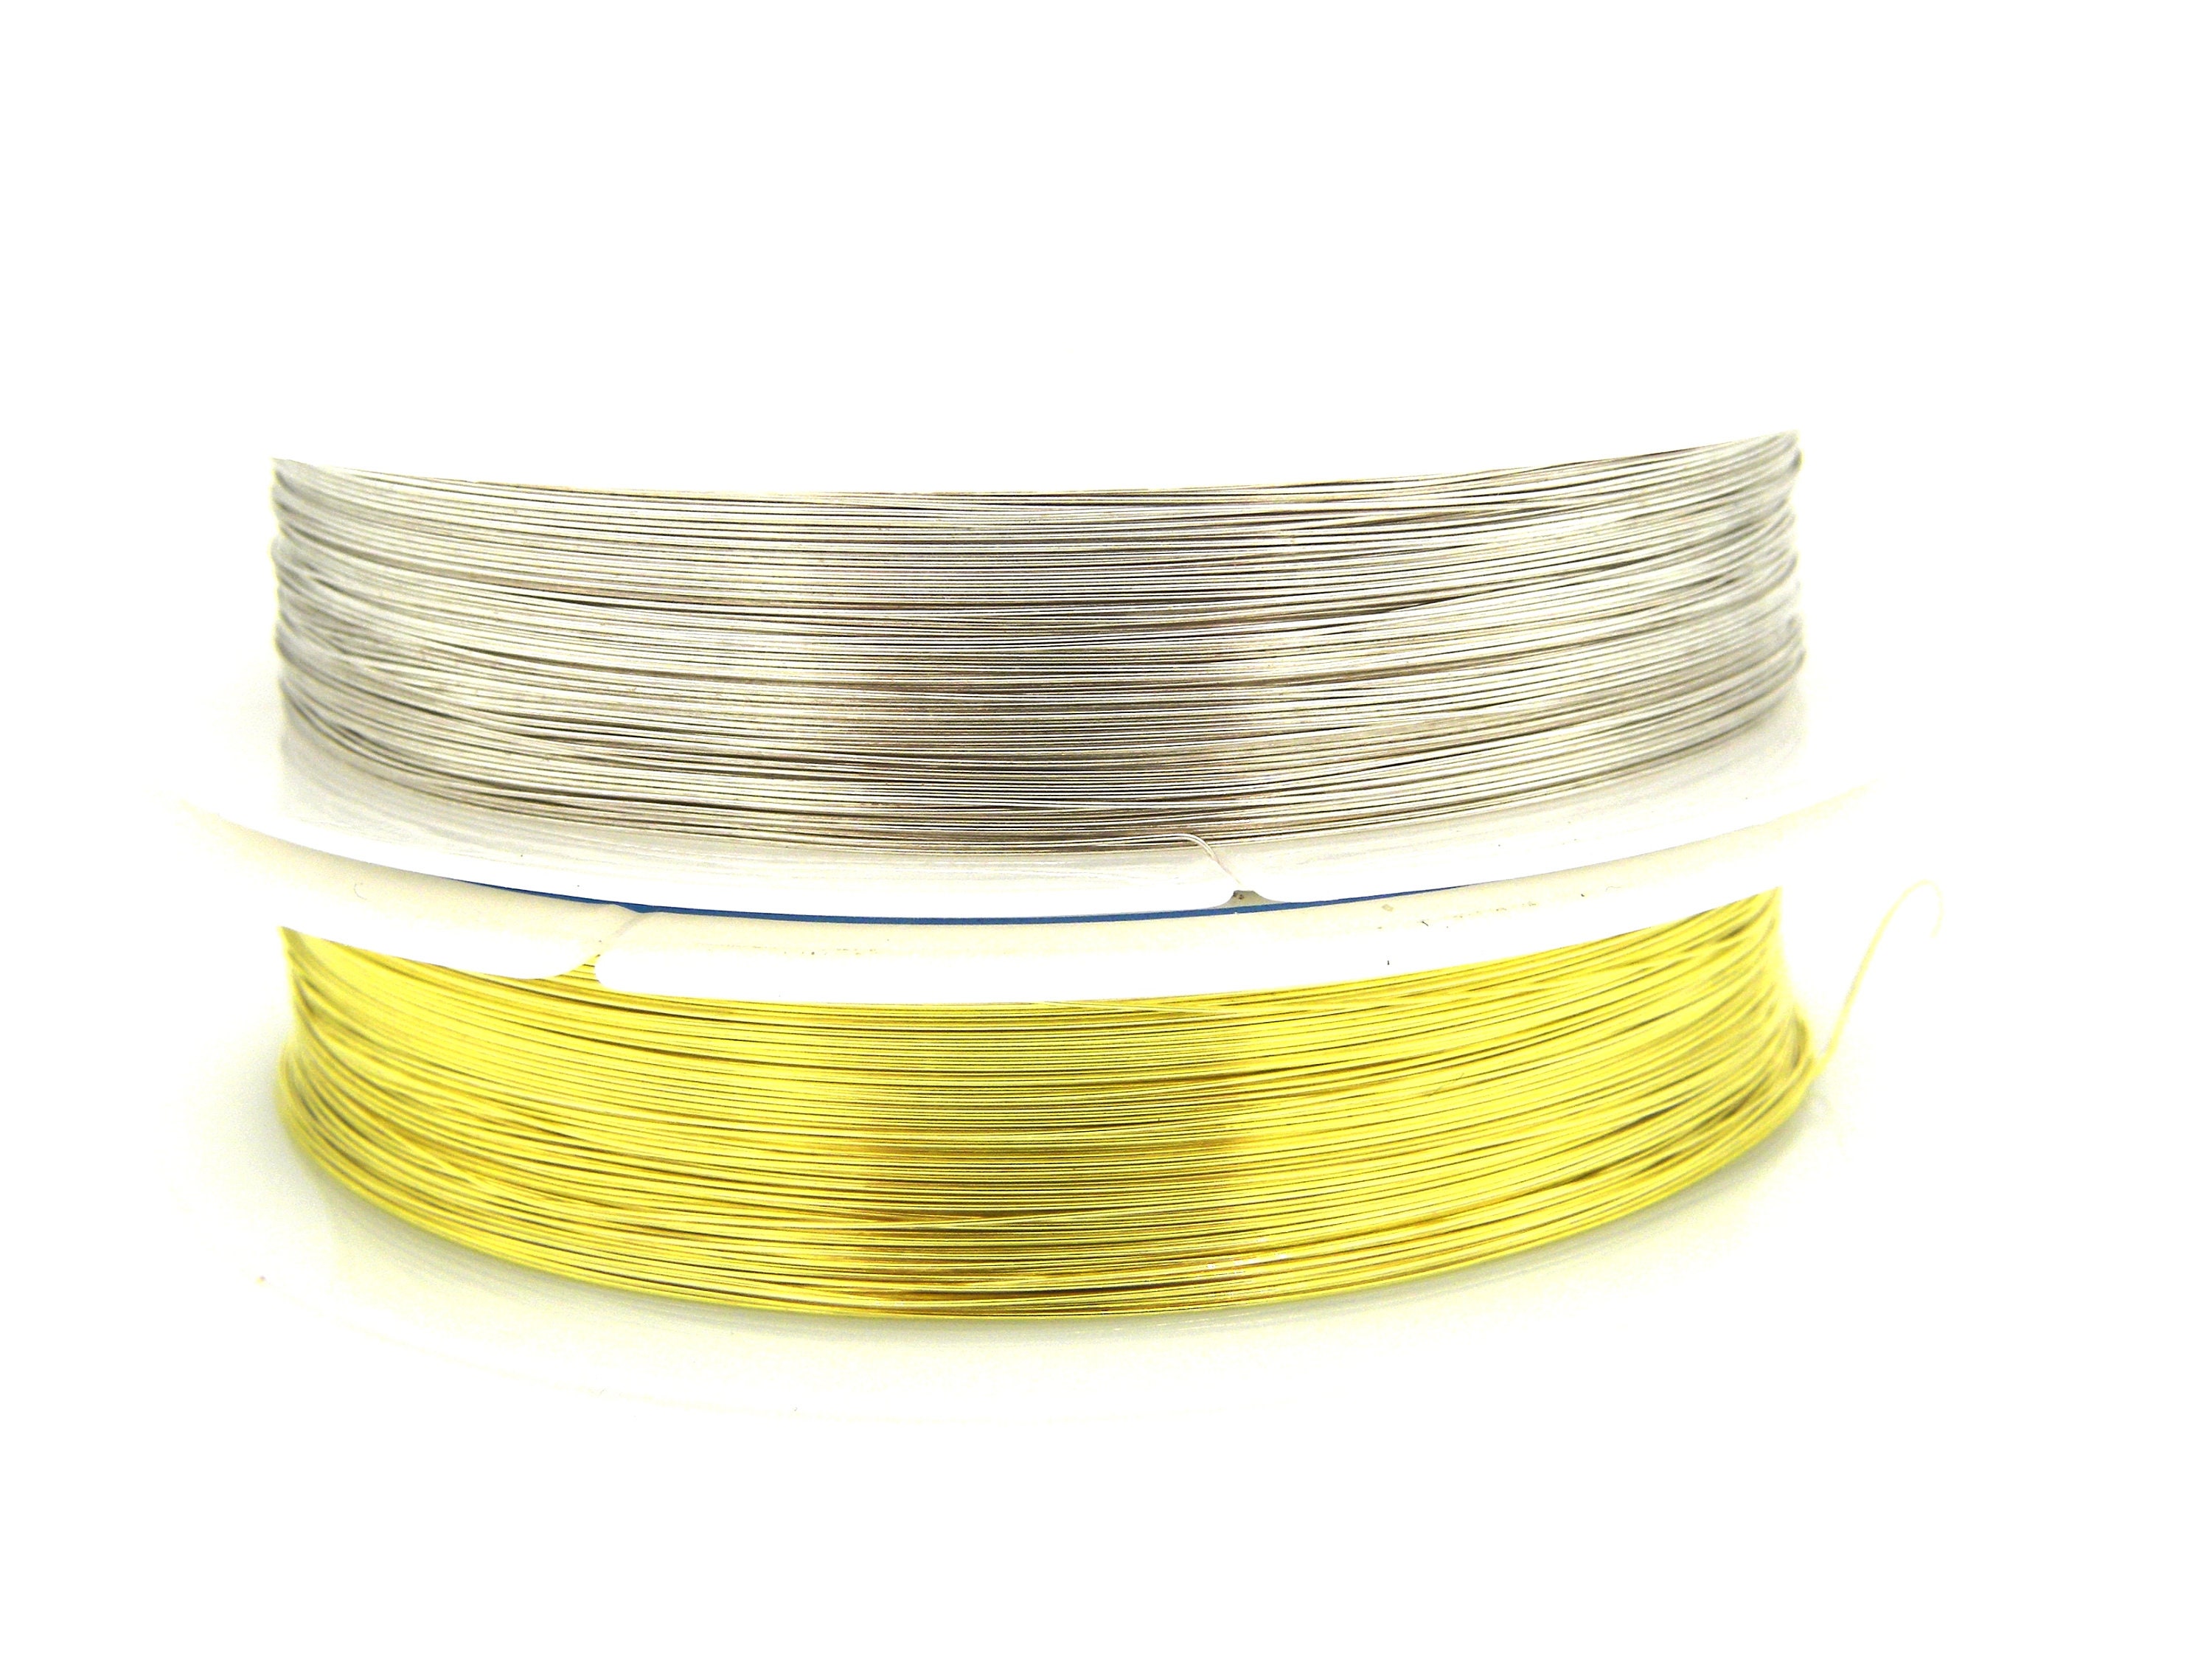 Wholesale 0.2/0.3/0.4/0.5/0.6/0.7/0.8/1.0 mm Copper Wires Beading Wire For Jewelry  Making, Gold/Copper and Silver colors